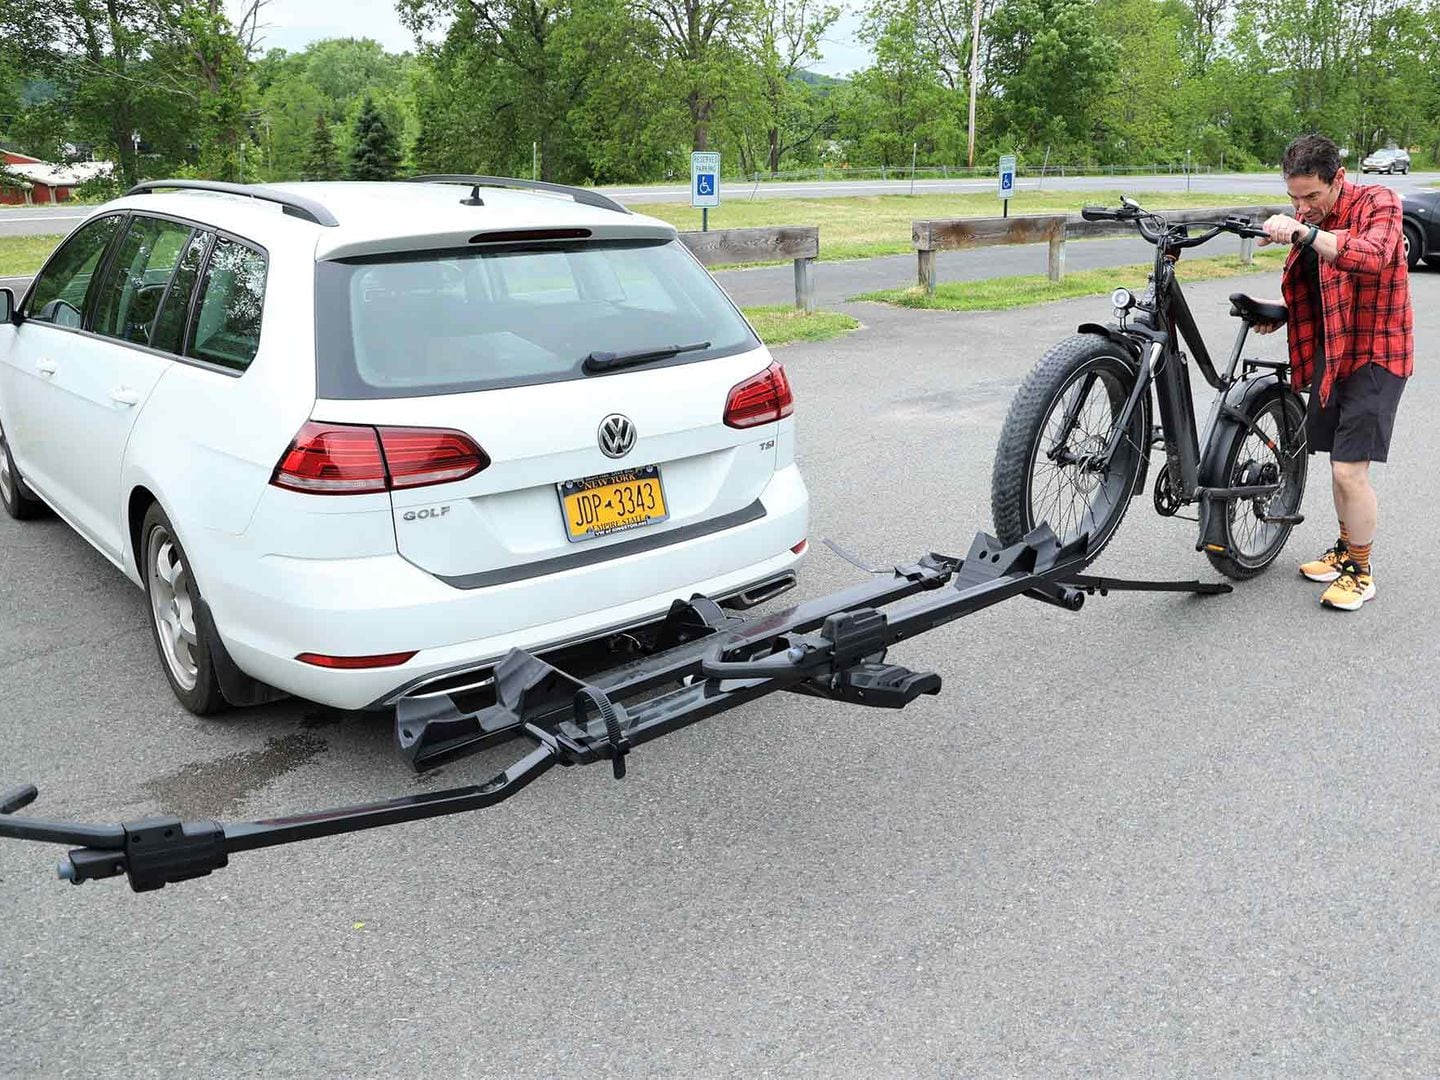 Bicycle carrier for ebikes, how to choose the right one